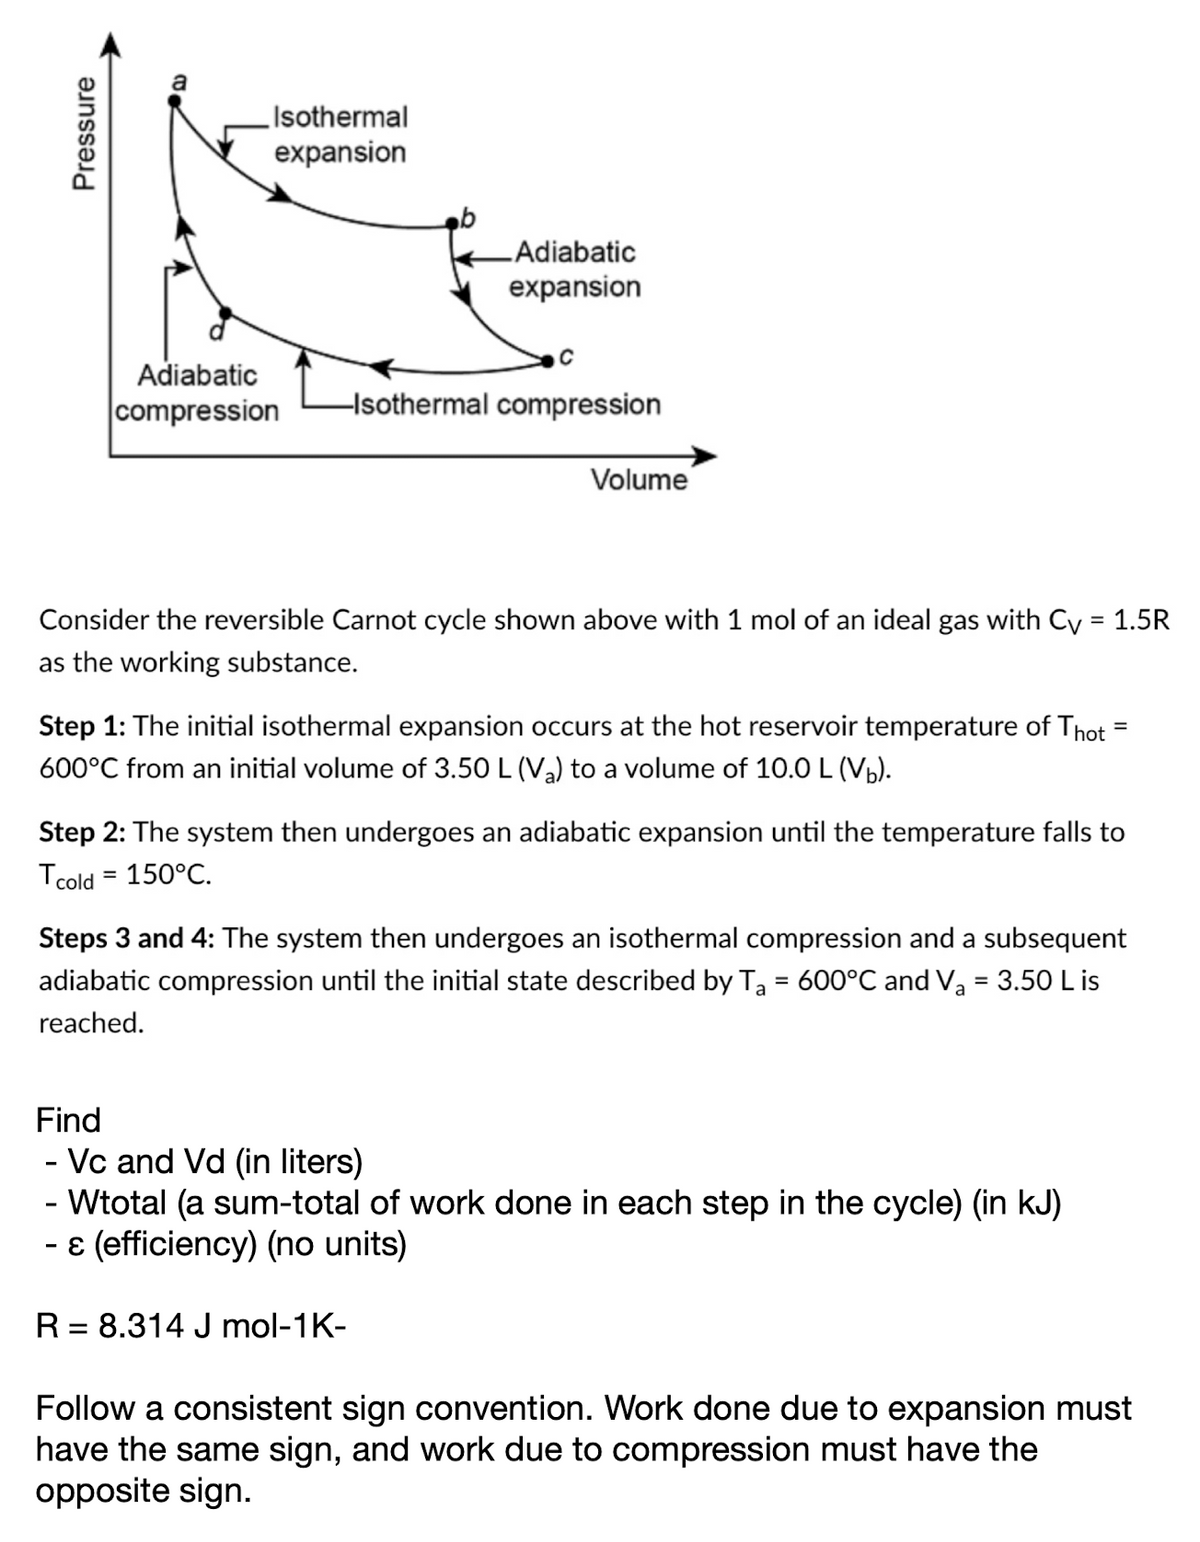 Pressure
a
Isothermal
expansion
Adiabatic
compression
Adiabatic
expansion
с
-Isothermal compression
Volume
Consider the reversible Carnot cycle shown above with 1 mol of an ideal gas with Cv = 1.5R
as the working substance.
=
Step 1: The initial isothermal expansion occurs at the hot reservoir temperature of Thot ²
600°C from an initial volume of 3.50 L (V₂) to a volume of 10.0 L (V₂).
Step 2: The system then undergoes an adiabatic expansion until the temperature falls to
Tcold = 150°C.
Steps 3 and 4: The system then undergoes an isothermal compression and a subsequent
adiabatic compression until the initial state described by T₂ = 600°C and V₂ = 3.50 L is
reached.
a
R = 8.314 J mol-1K-
Find
- Vc and Vd (in liters)
- Wtotal (a sum-total of work done in each step in the cycle) (in kJ)
& (efficiency) (no units)
Follow a consistent sign convention. Work done due to expansion must
have the same sign, and work due to compression must have the
opposite sign.